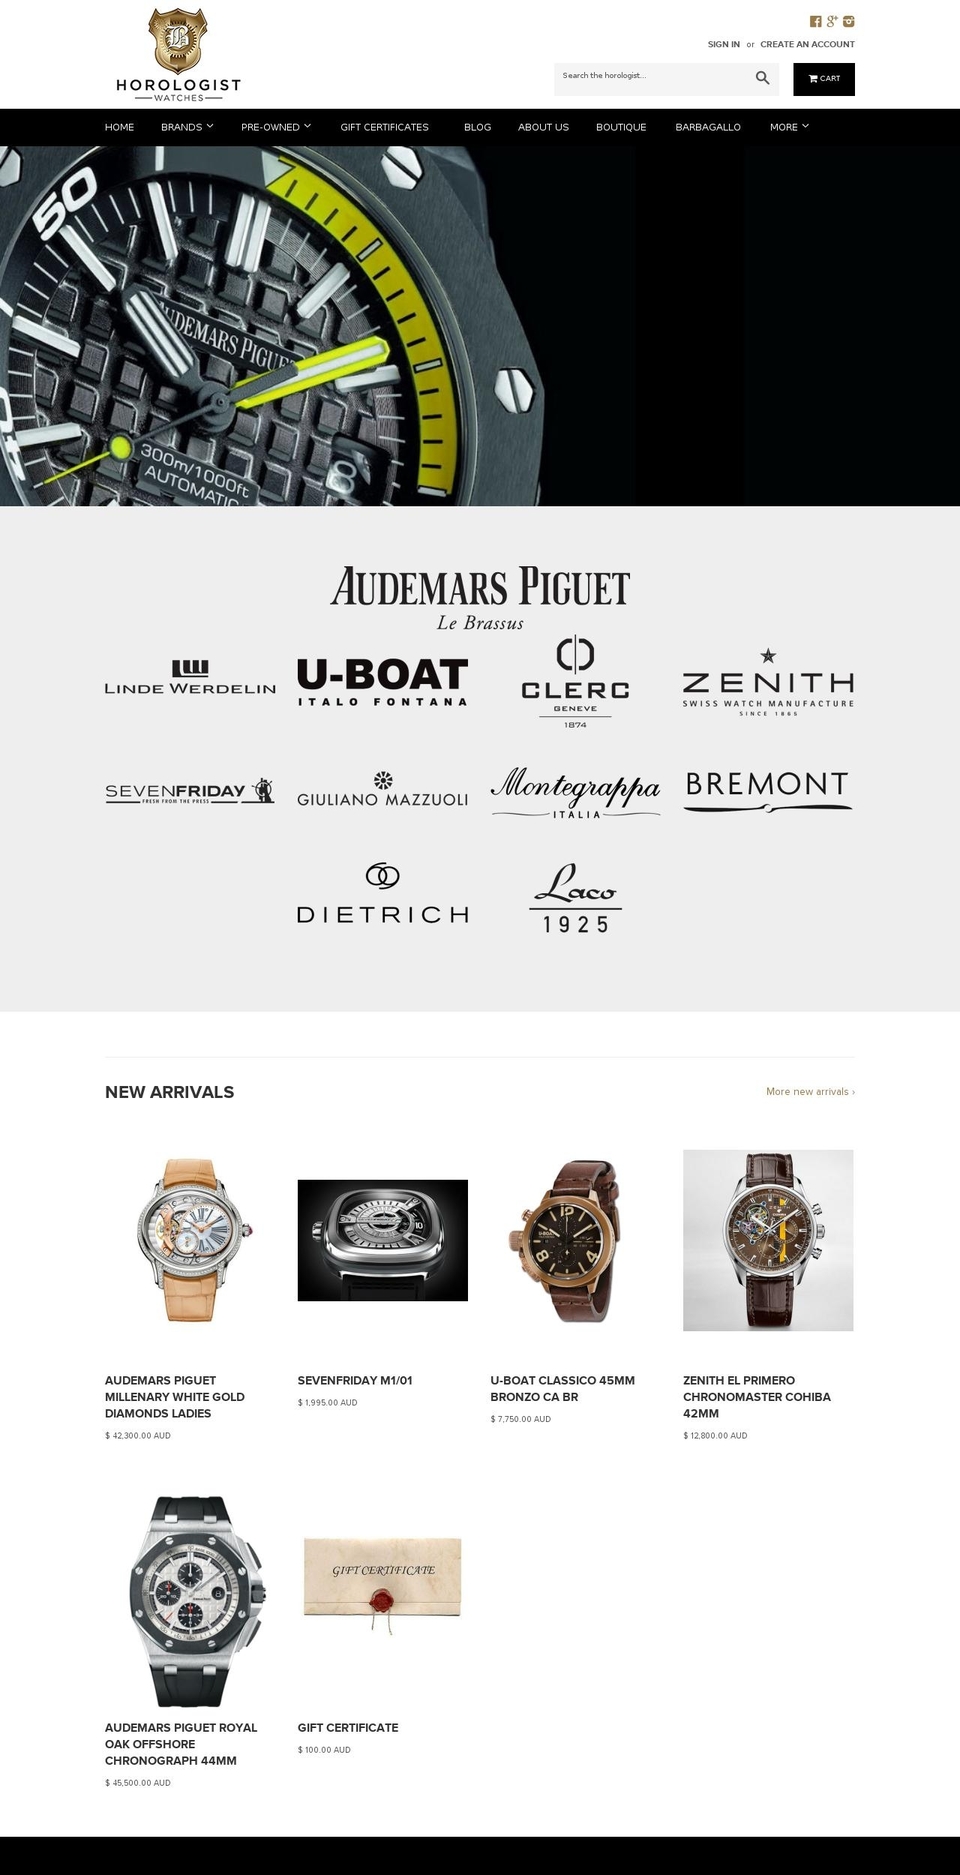 Alchemy Shopify theme site example barbagallo.watch